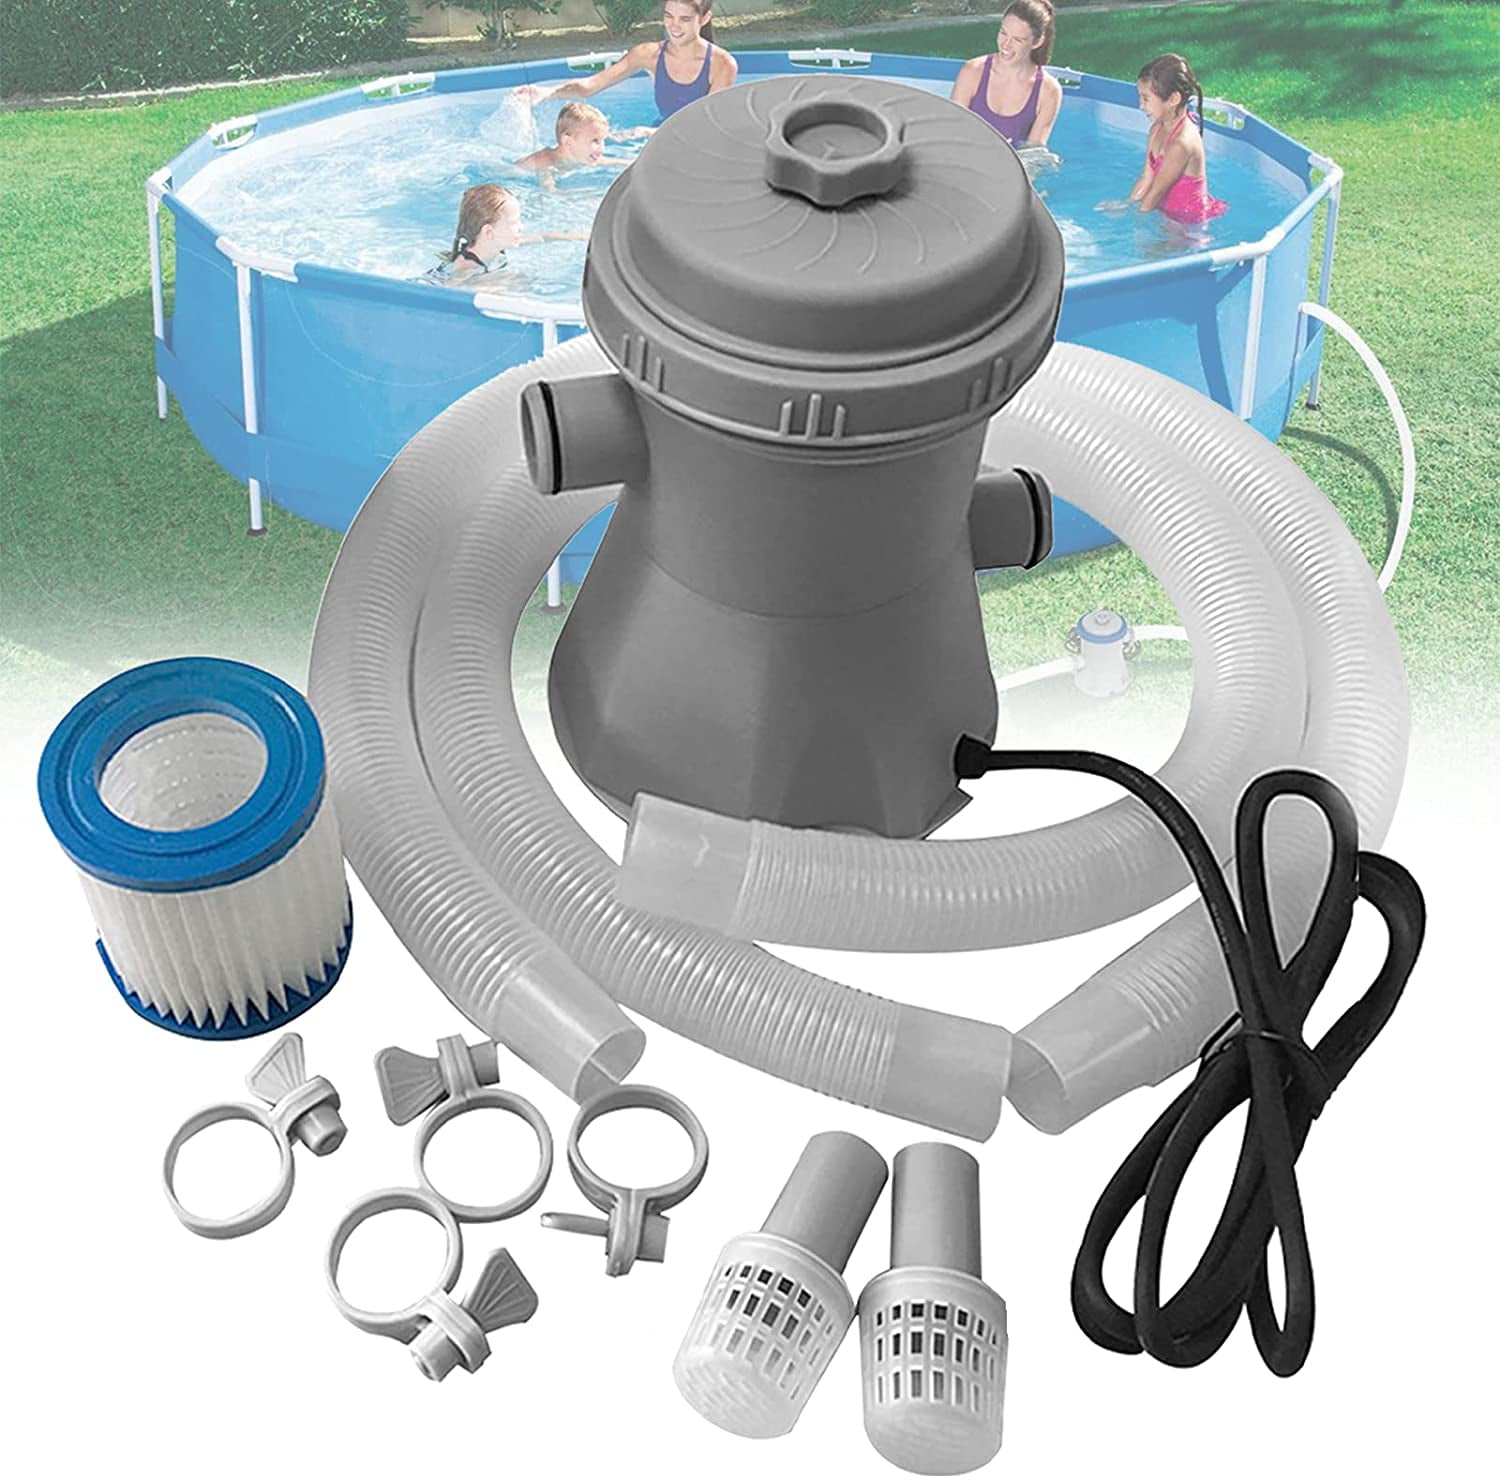 220V Summer Waves Swimming Pool Water Cleaner Filter Pump For Above Ground Pools 